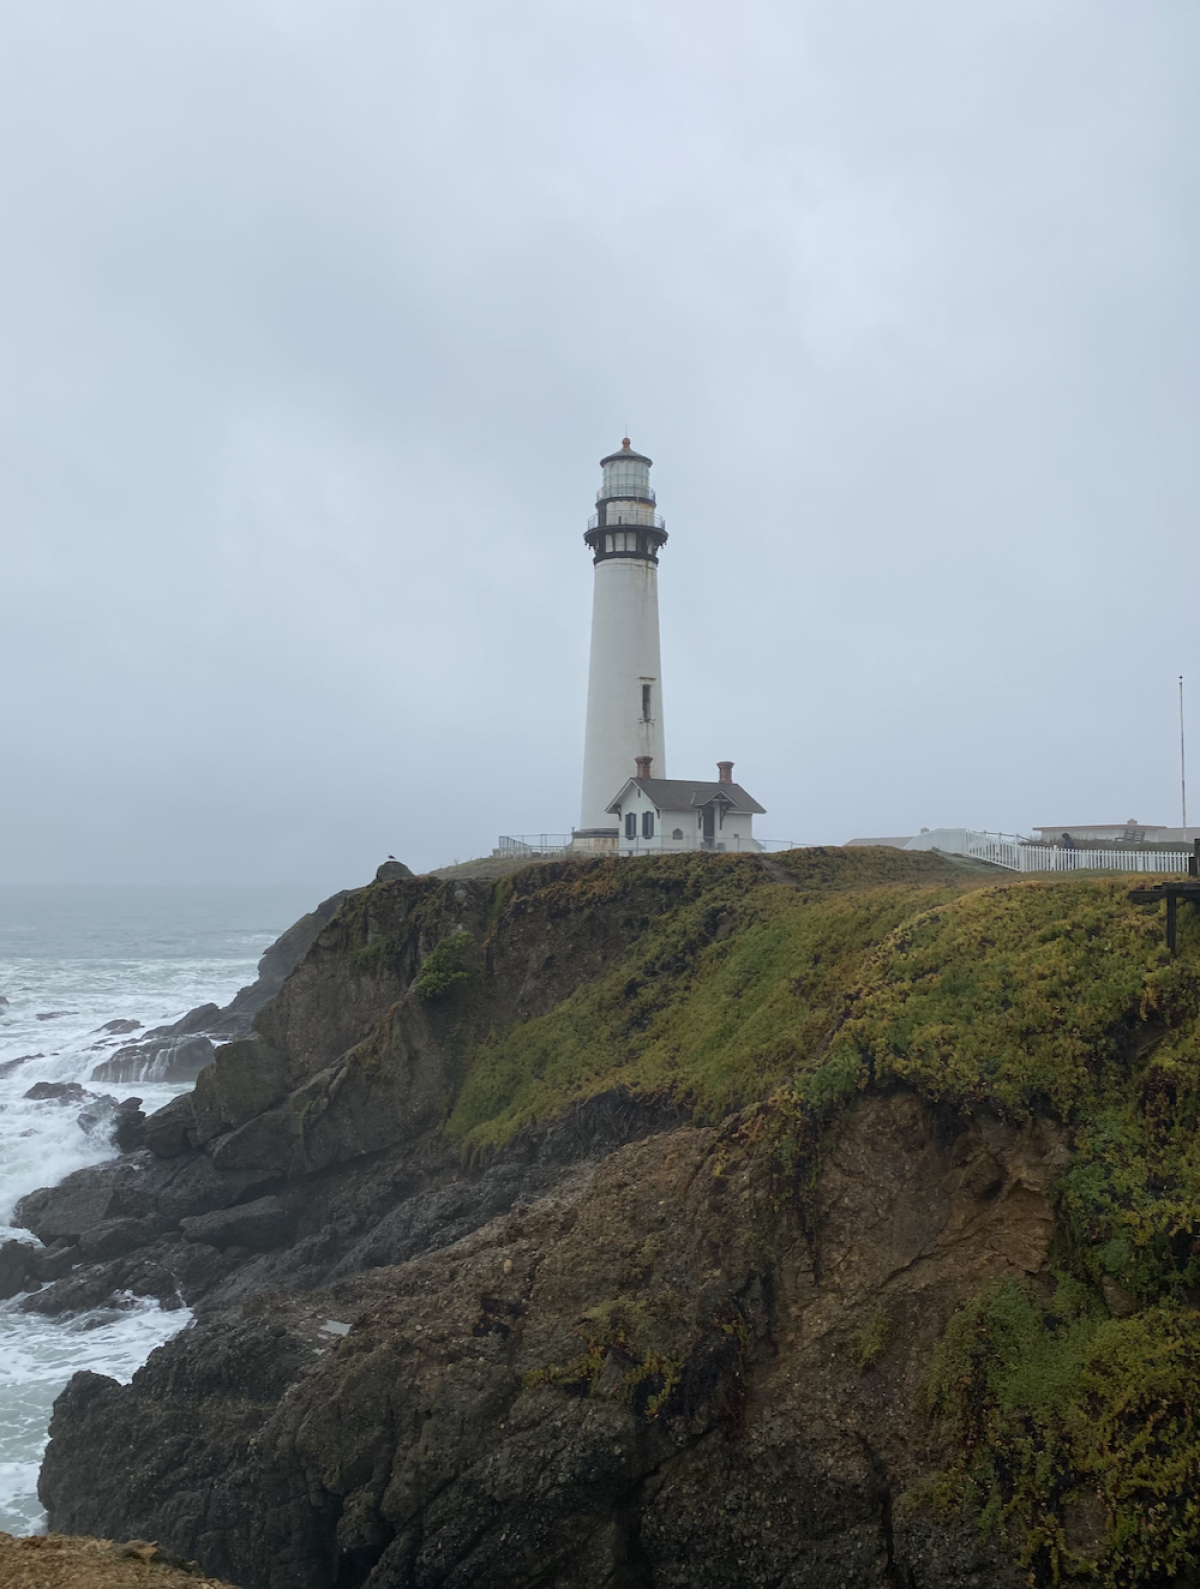 A lighthouse on the edge of an oceanside cliff under foggy skies.